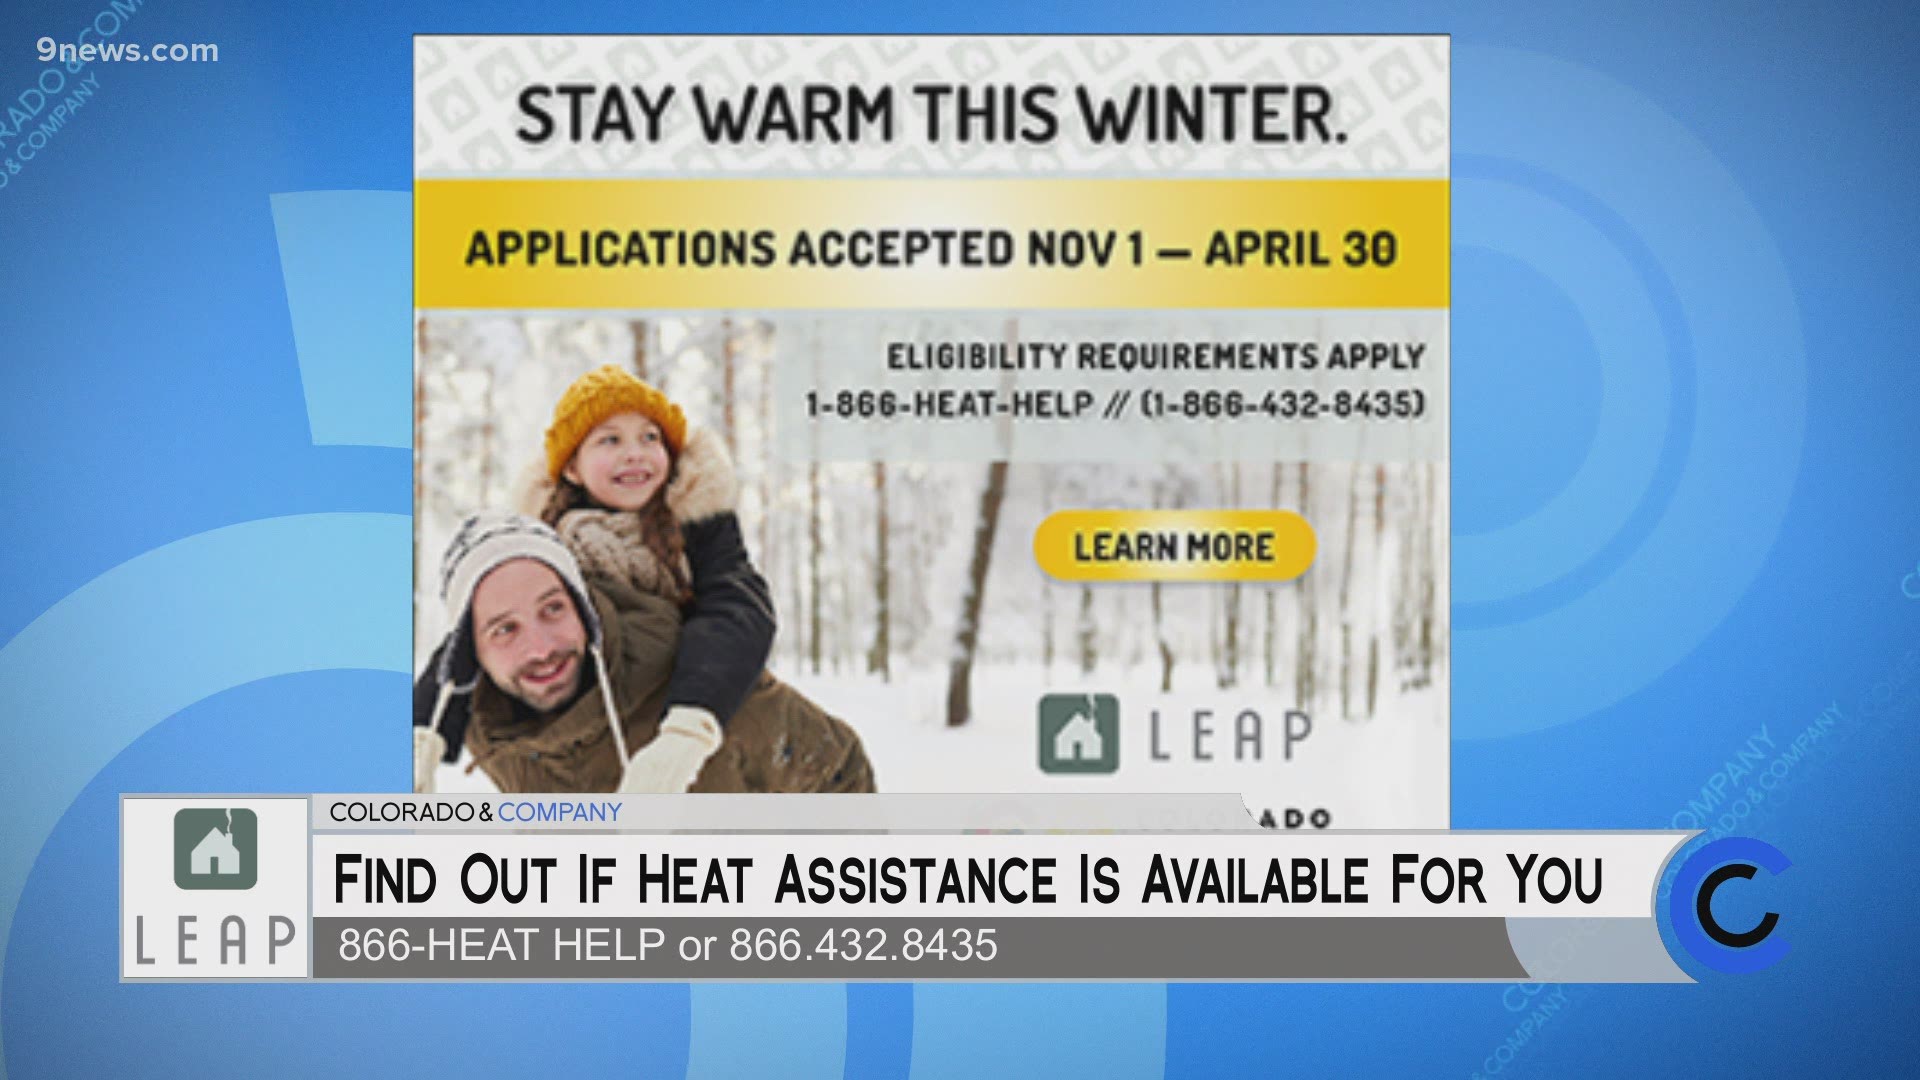 Find out if assistance is available to you by calling 866.432.8435 or visit Colorado.gov/CDHS/LEAP.